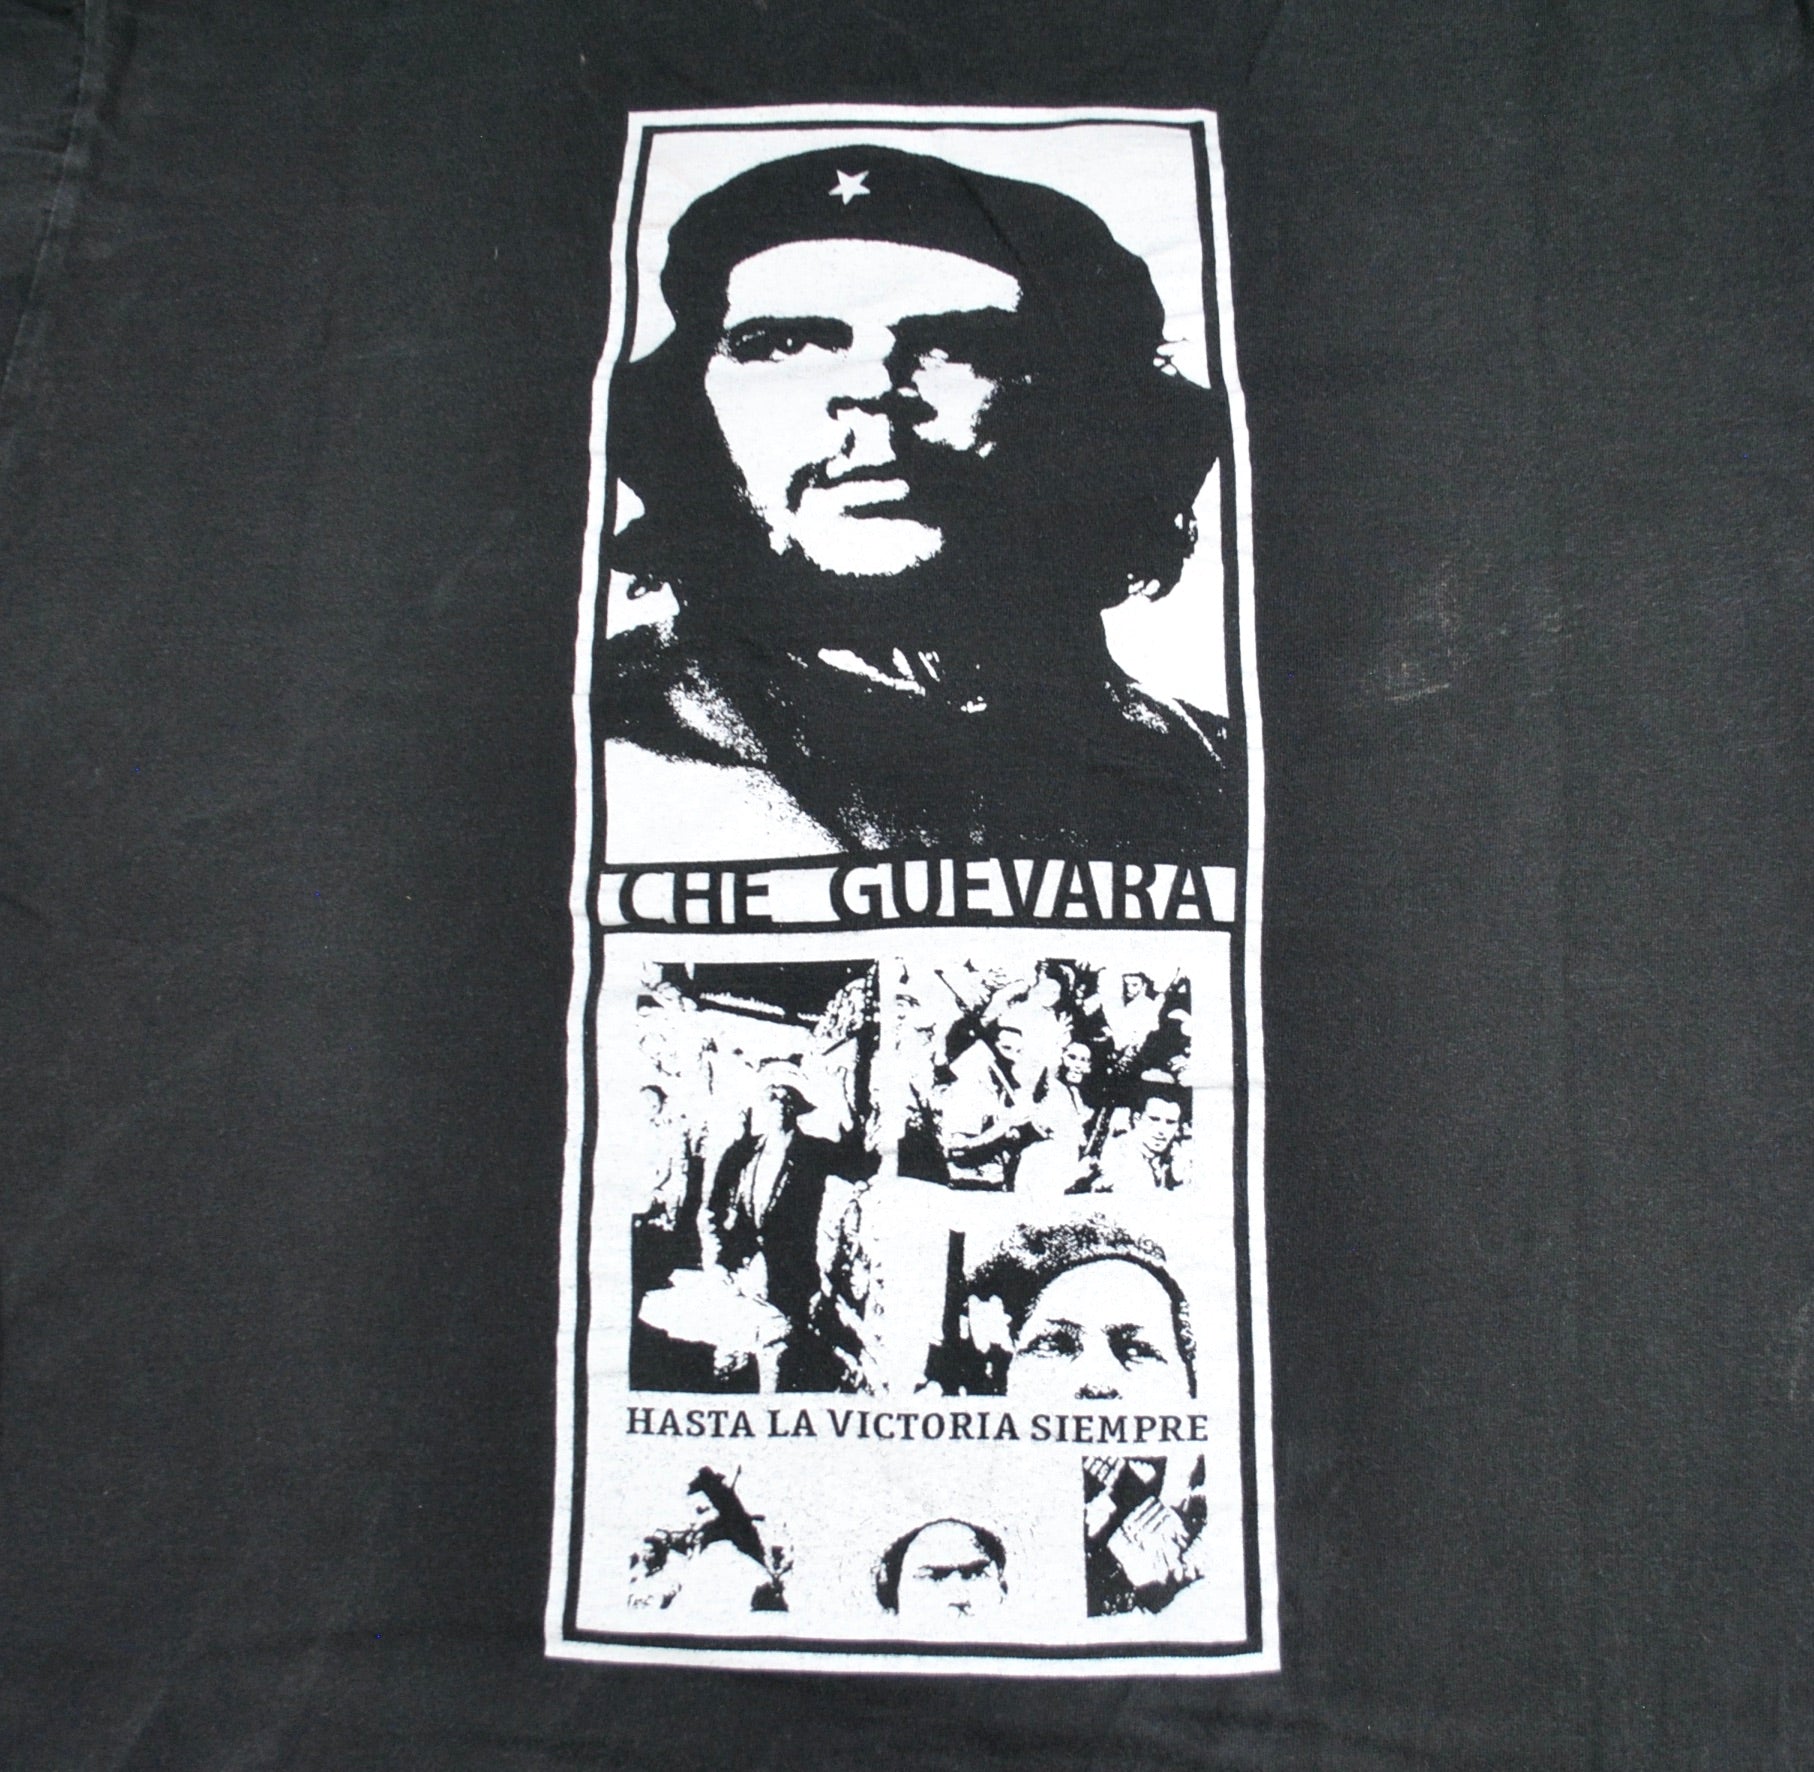 Vintage Che Guevara Made in USA 90s Shirt Size Large – Yesterday's Attic